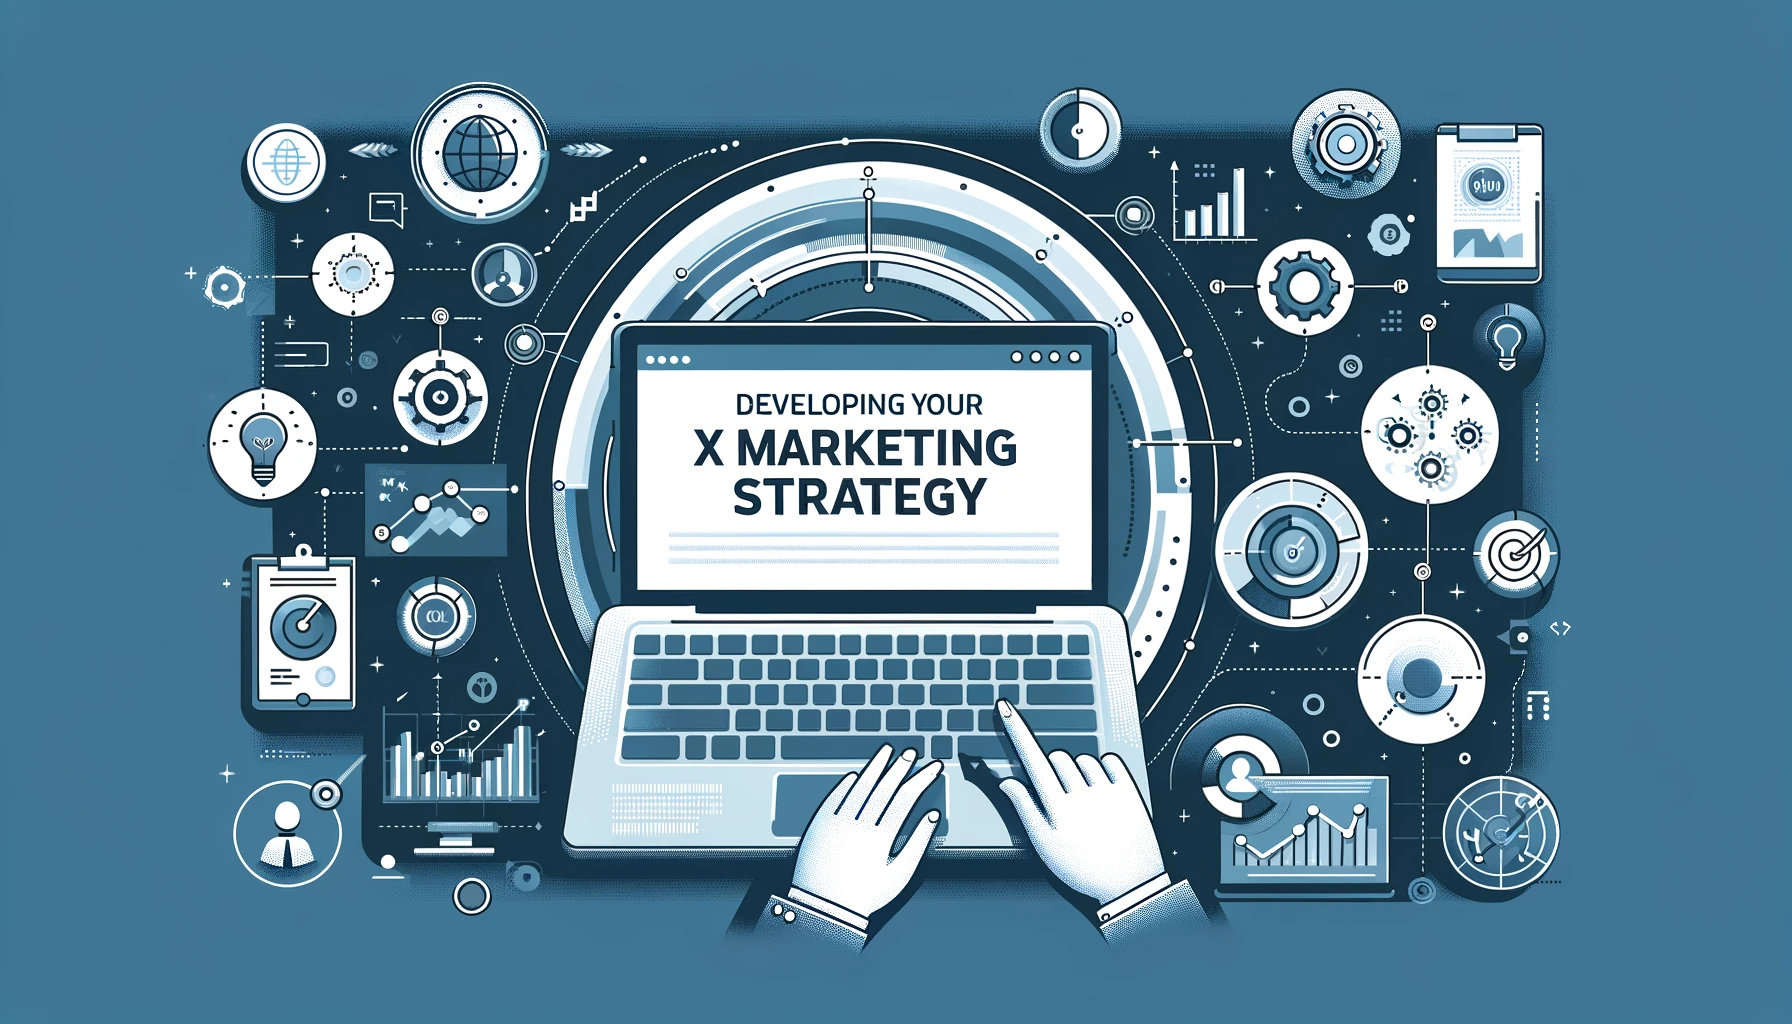 Developing Your X Marketing Strategy